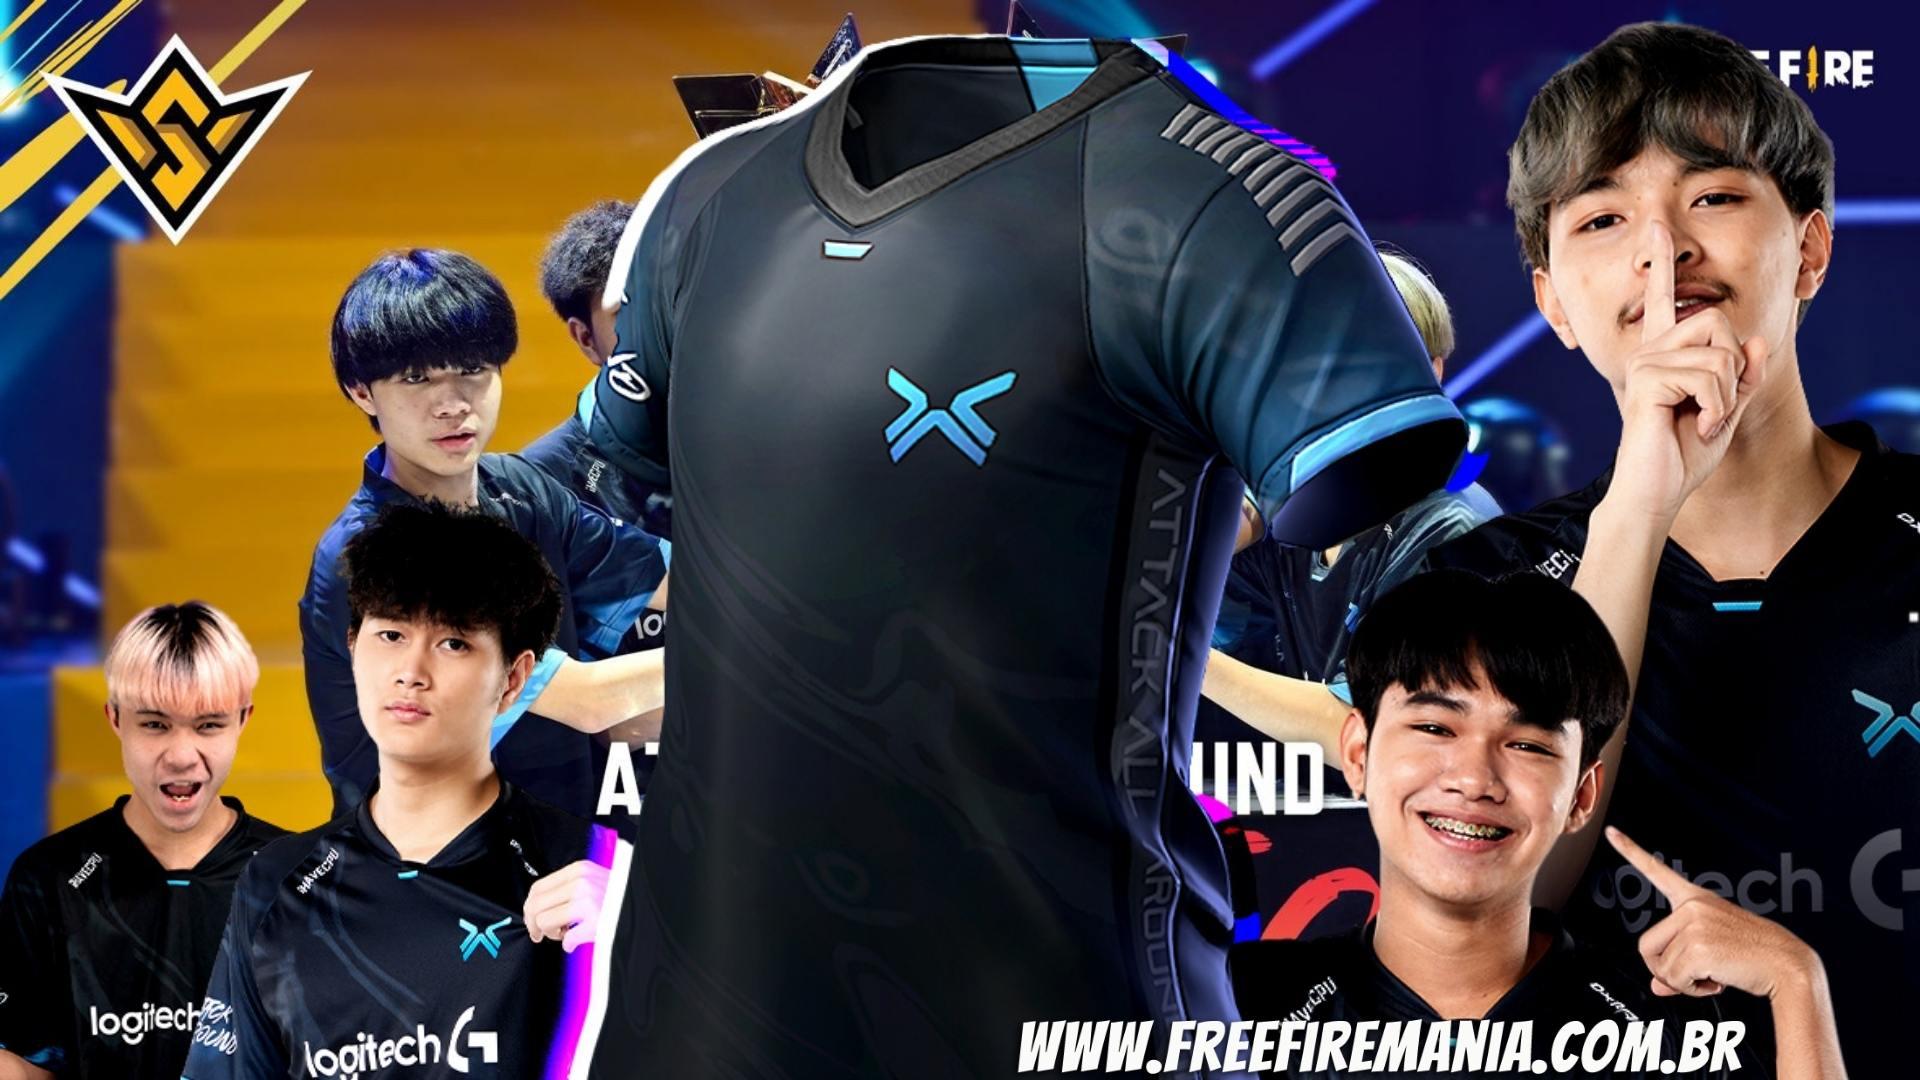 Free Fire 2022 world champion team shirt arrives in the game; see the  images